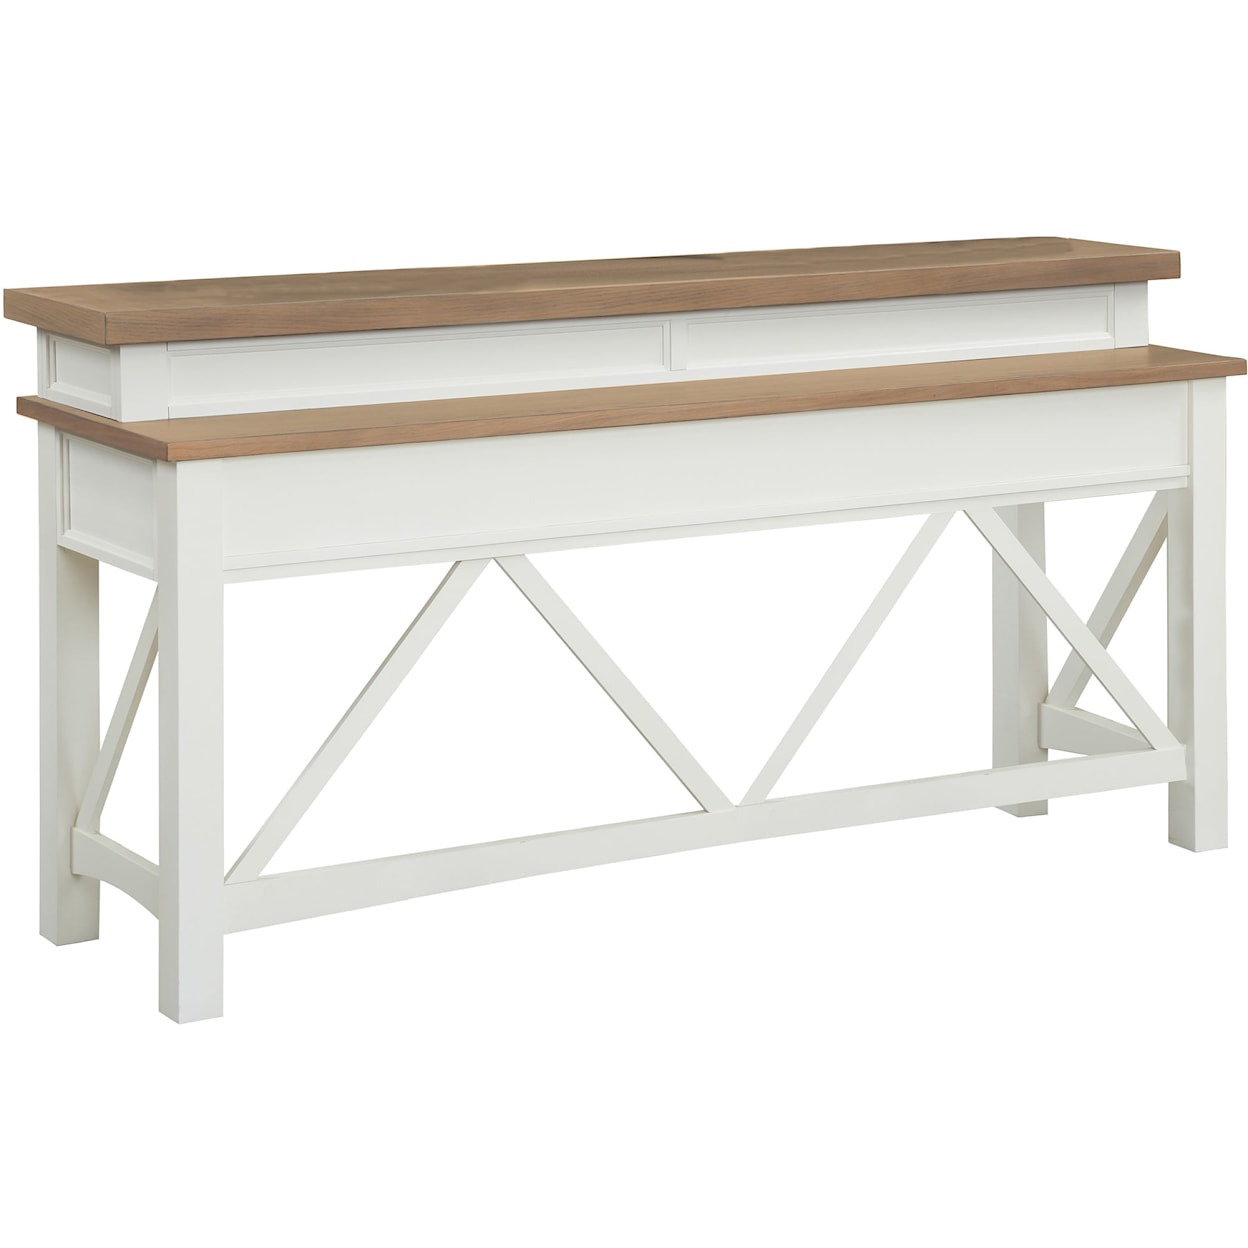 Paramount Furniture Americana Modern Everywhere Console Table